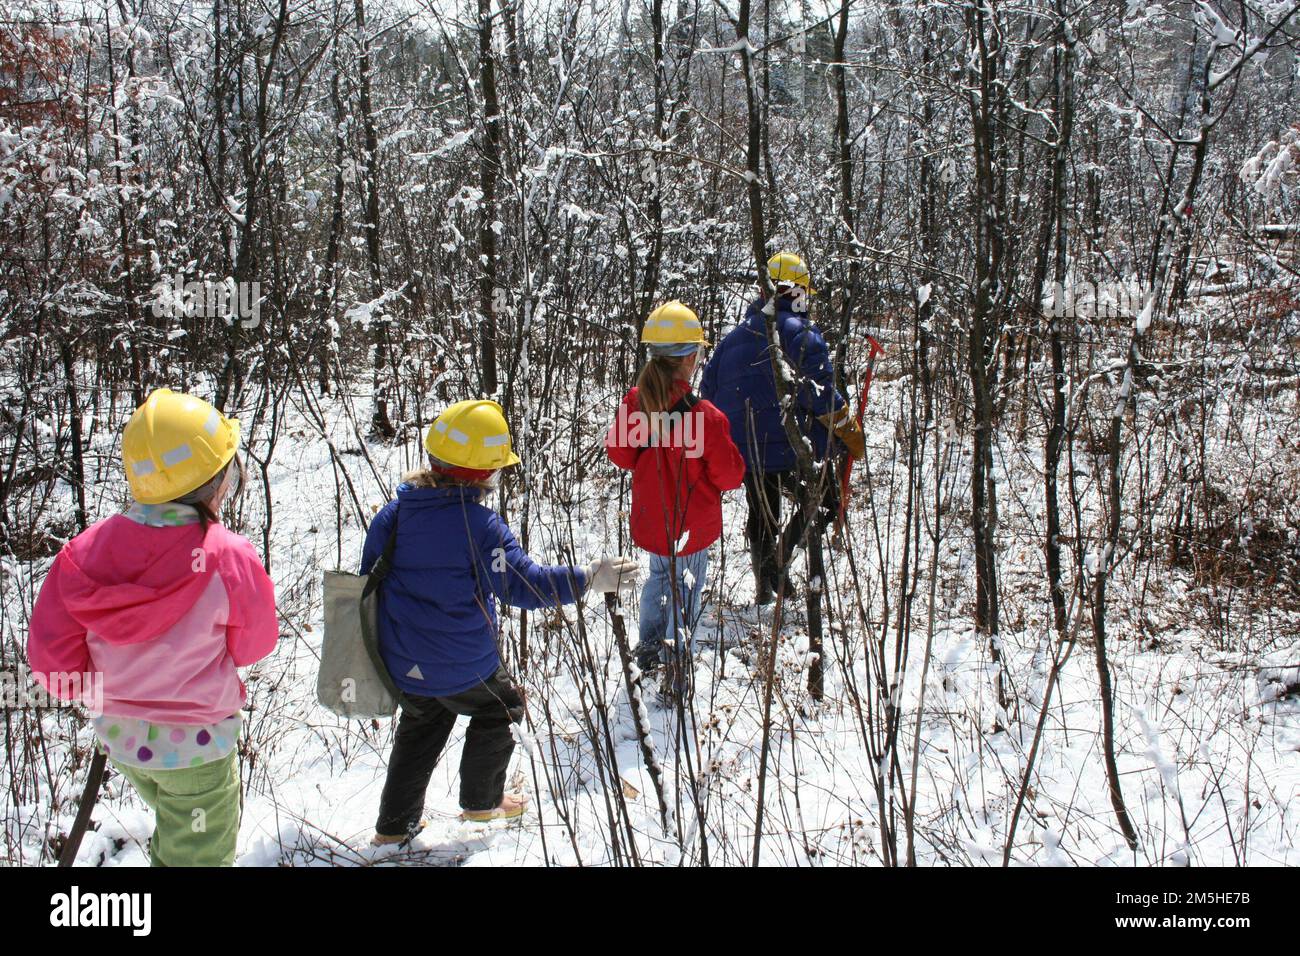 Gunflint Trail Scenic Byway - Girl Scouts at the Gunflint Green Up. Three 2nd and 3rd grade Girl Scouts in brightly-colored jackets and yellow hard hats head through a burned forest with their leader to plant tree seedlings during Gunflint Green Up. Minnesota (48.037° N 90.407° W) Stock Photo